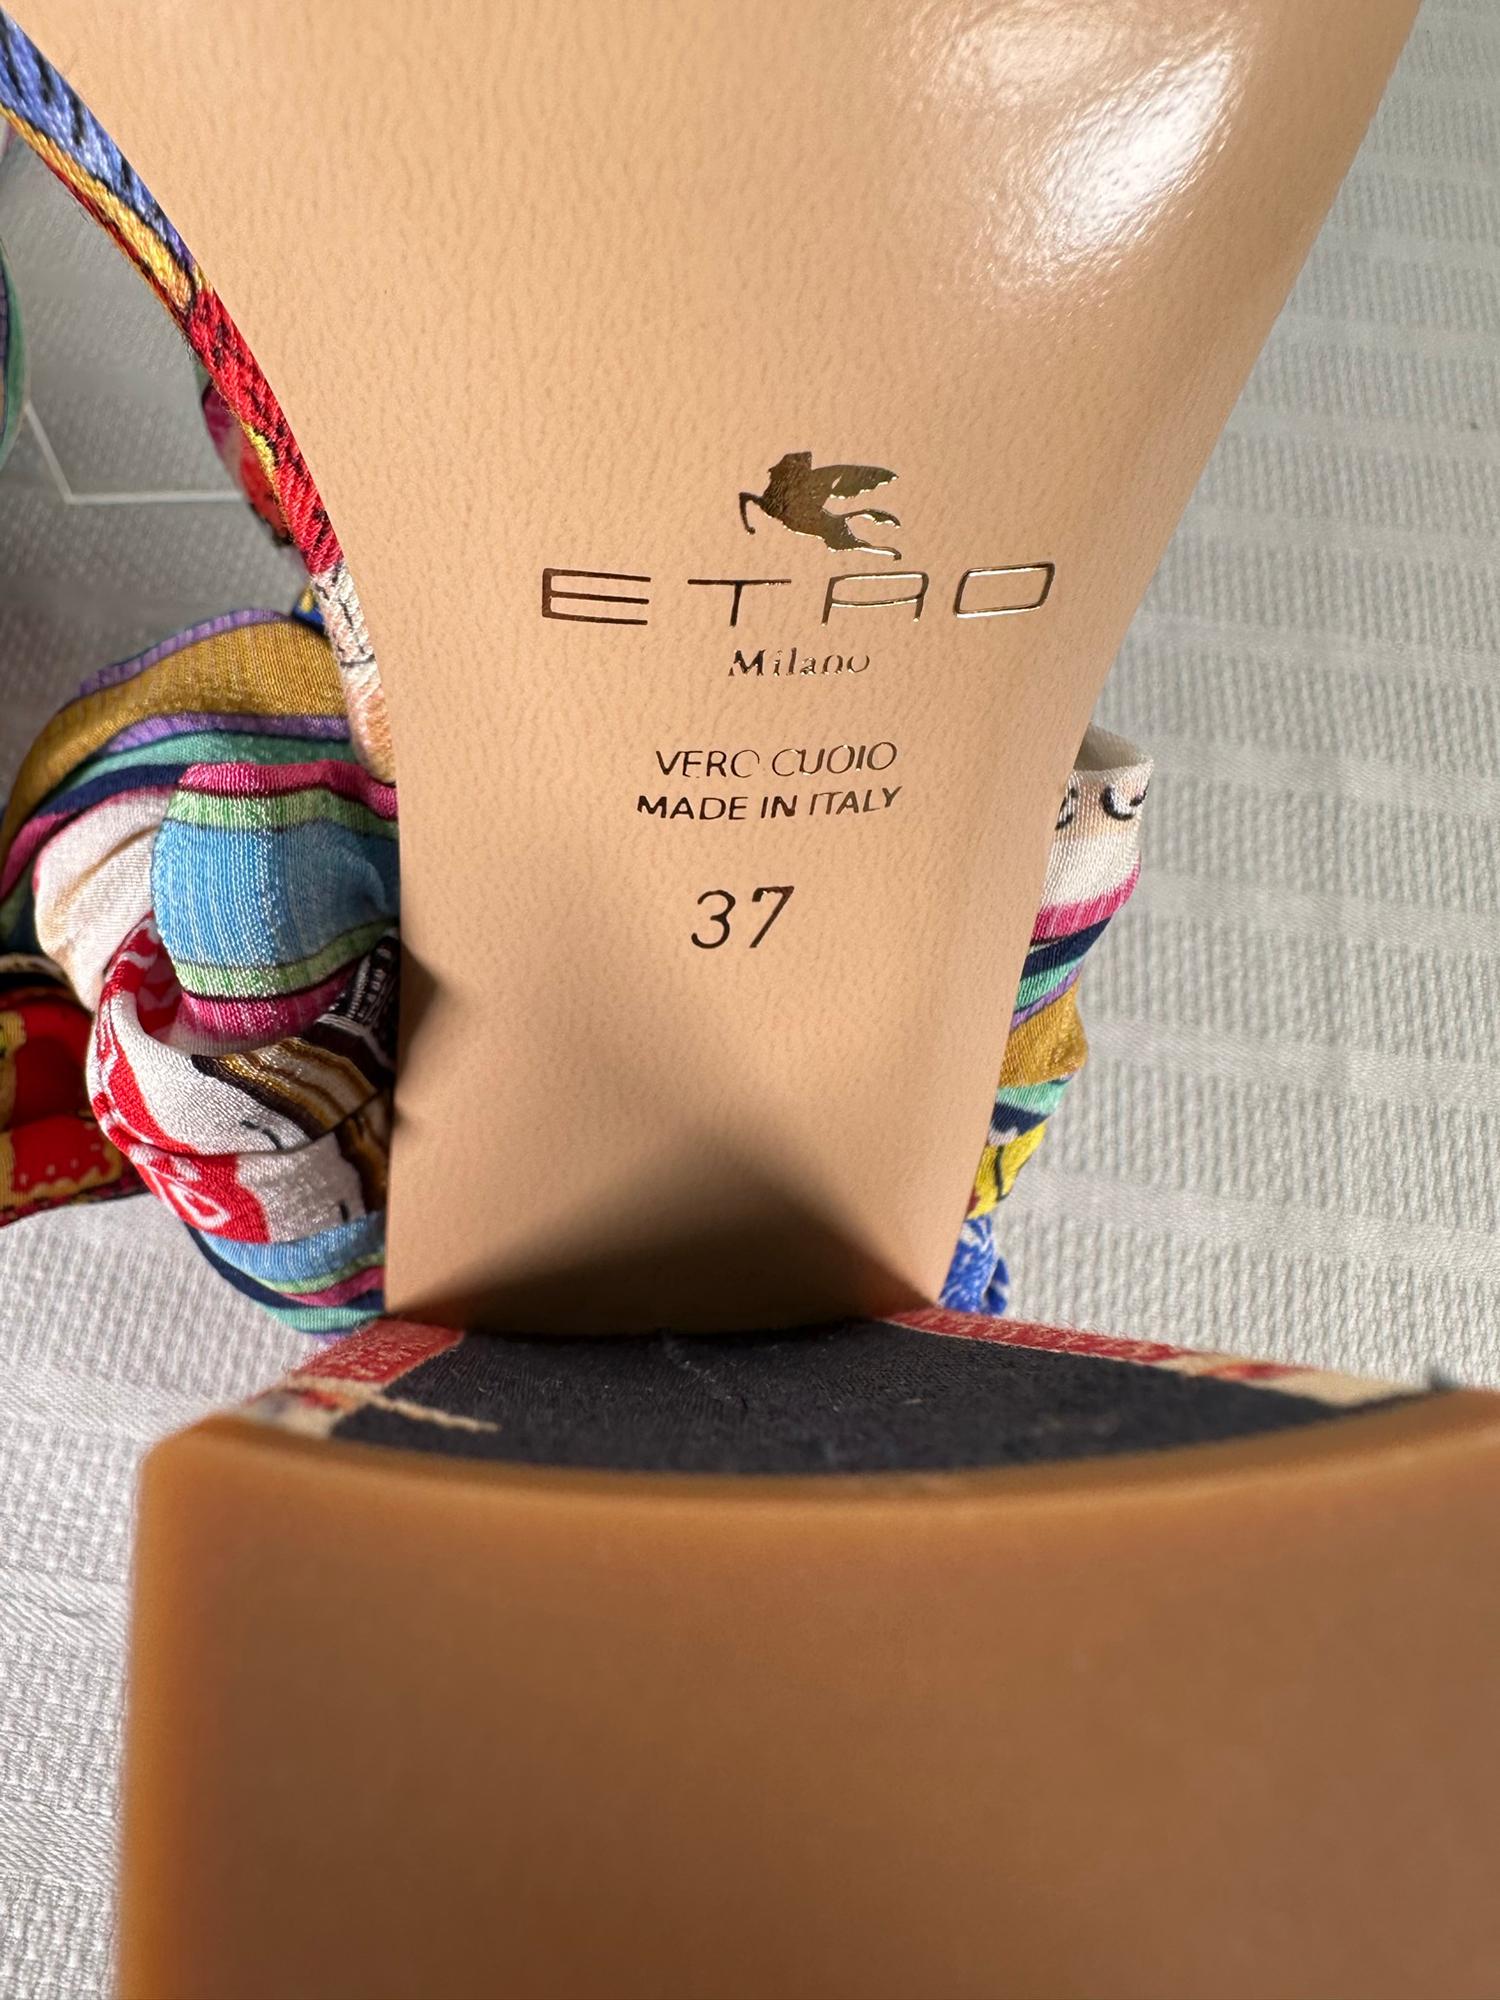 Etro Chunky Heel Printed Fabric Ankle Wrap Sandals 37 Unworn with Box For Sale 6